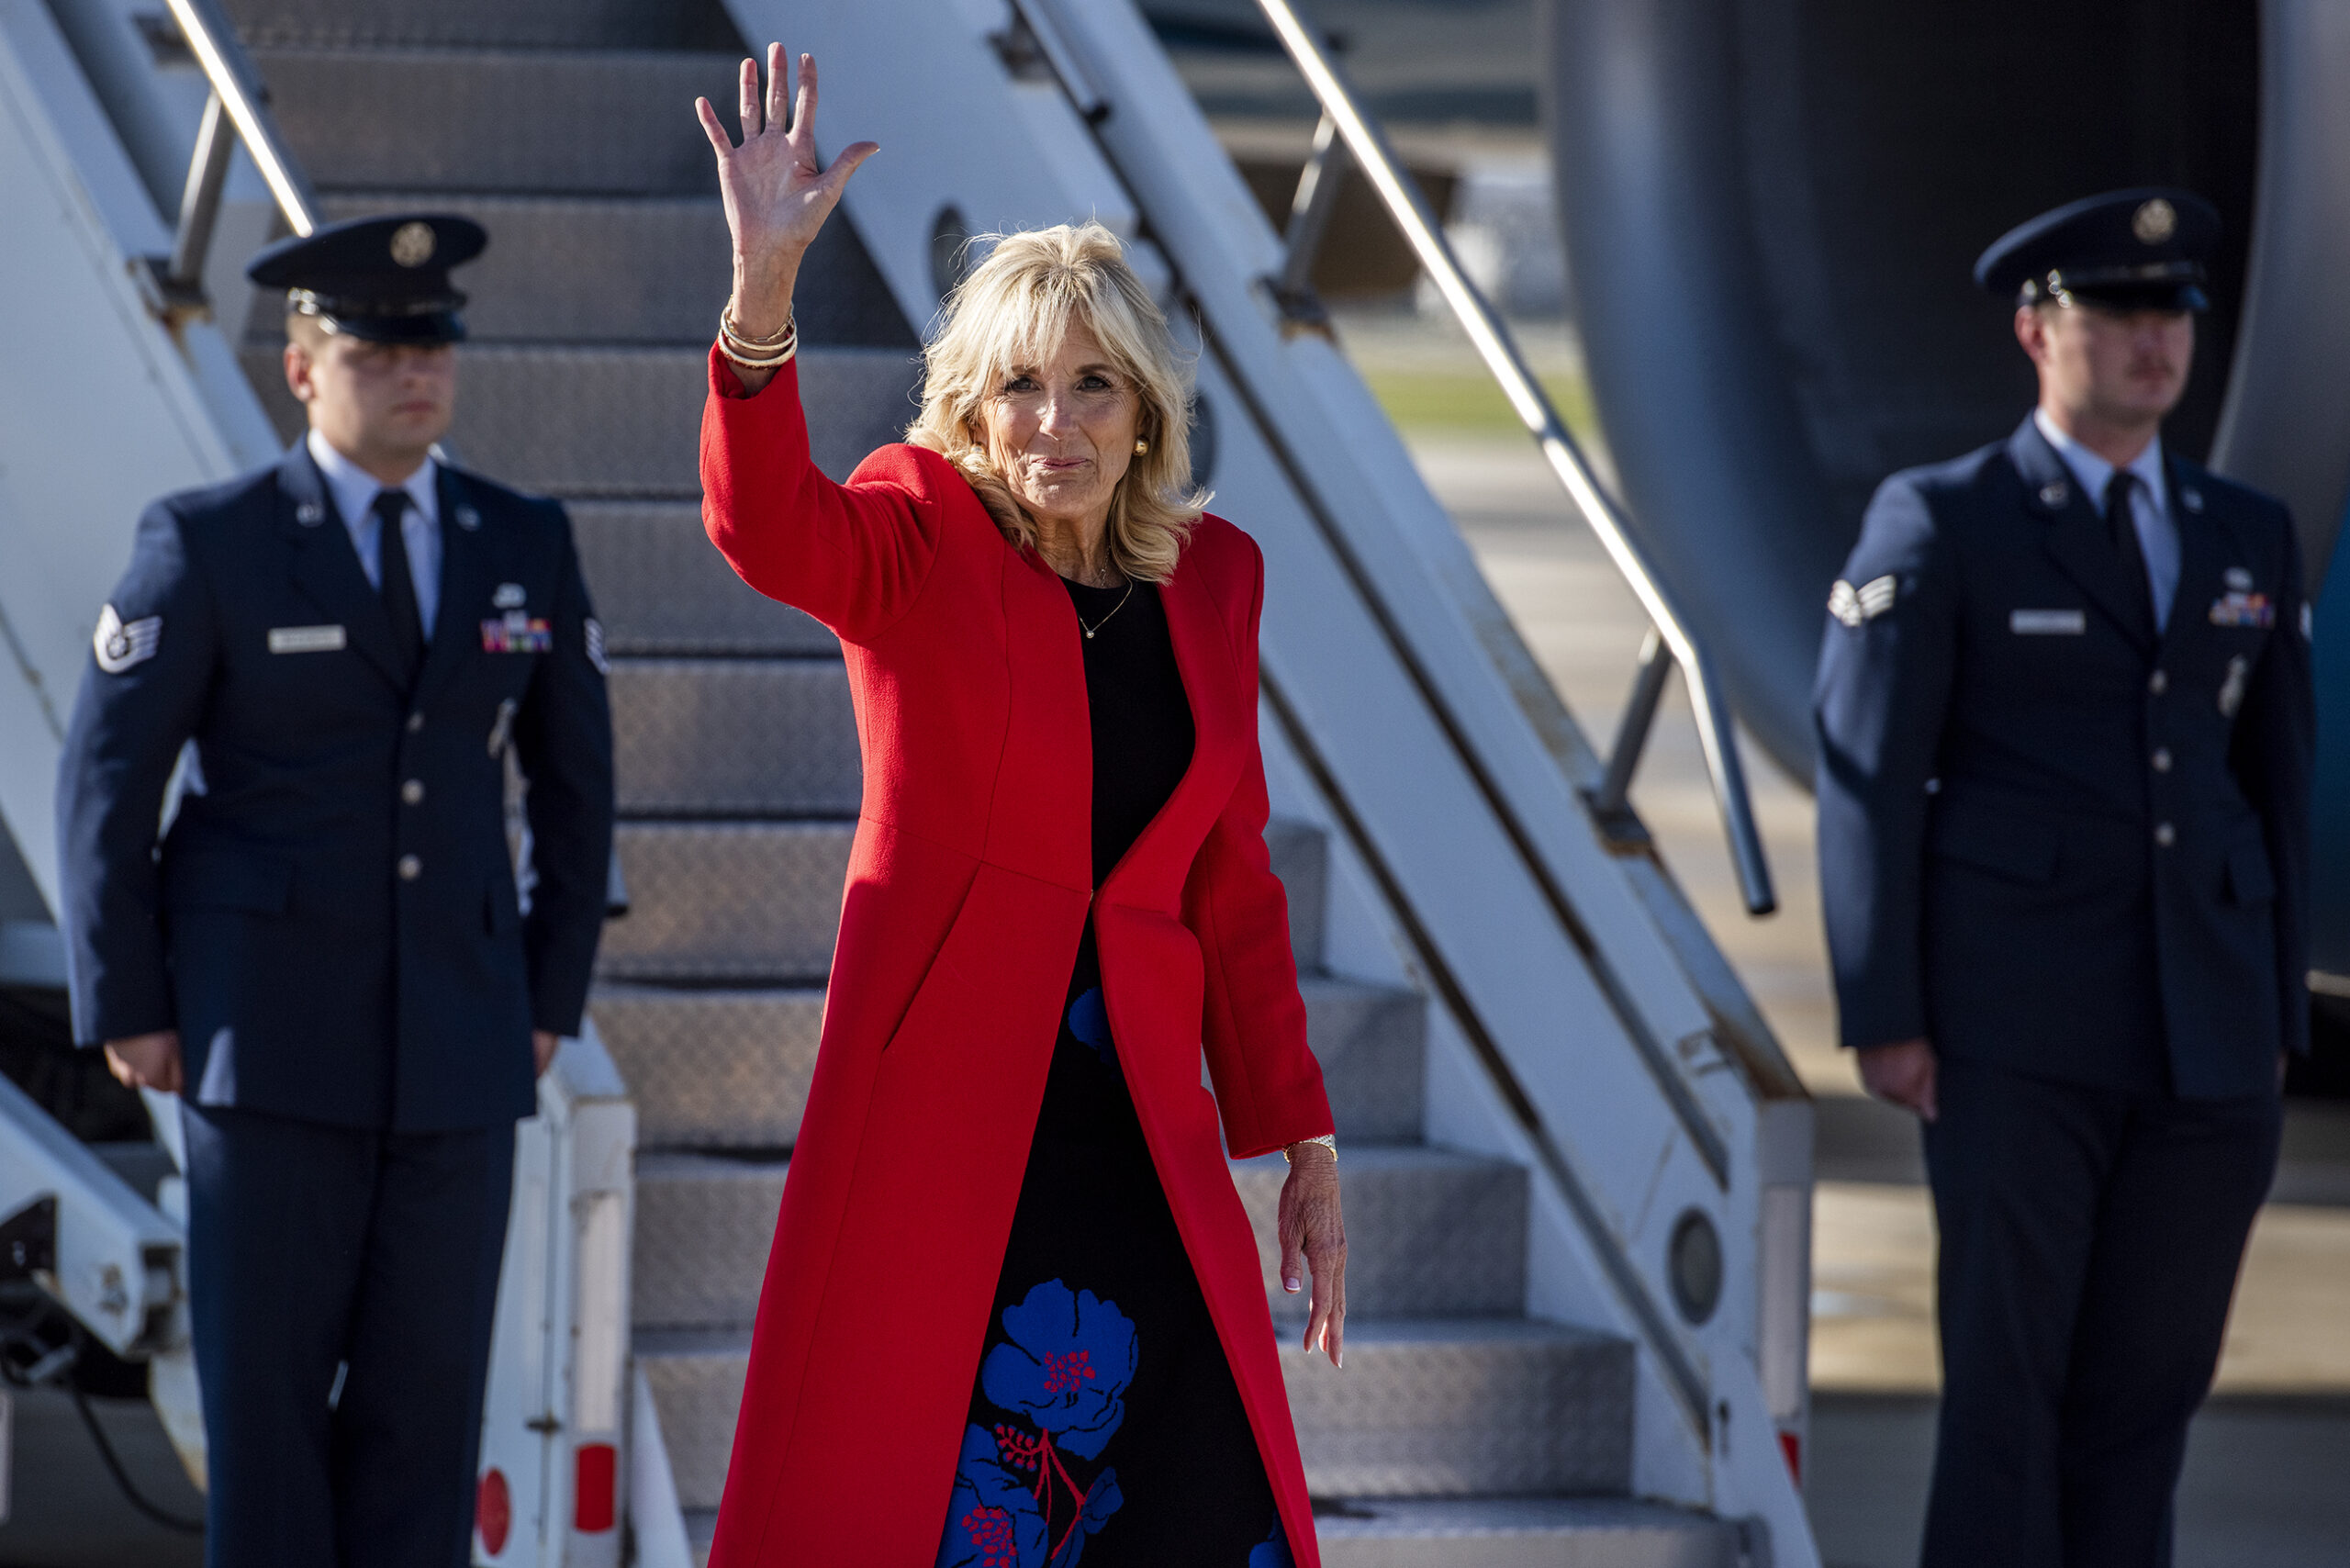 Jill Biden waves as she walks from the airplane to her vehicle. She wears a long red coat.